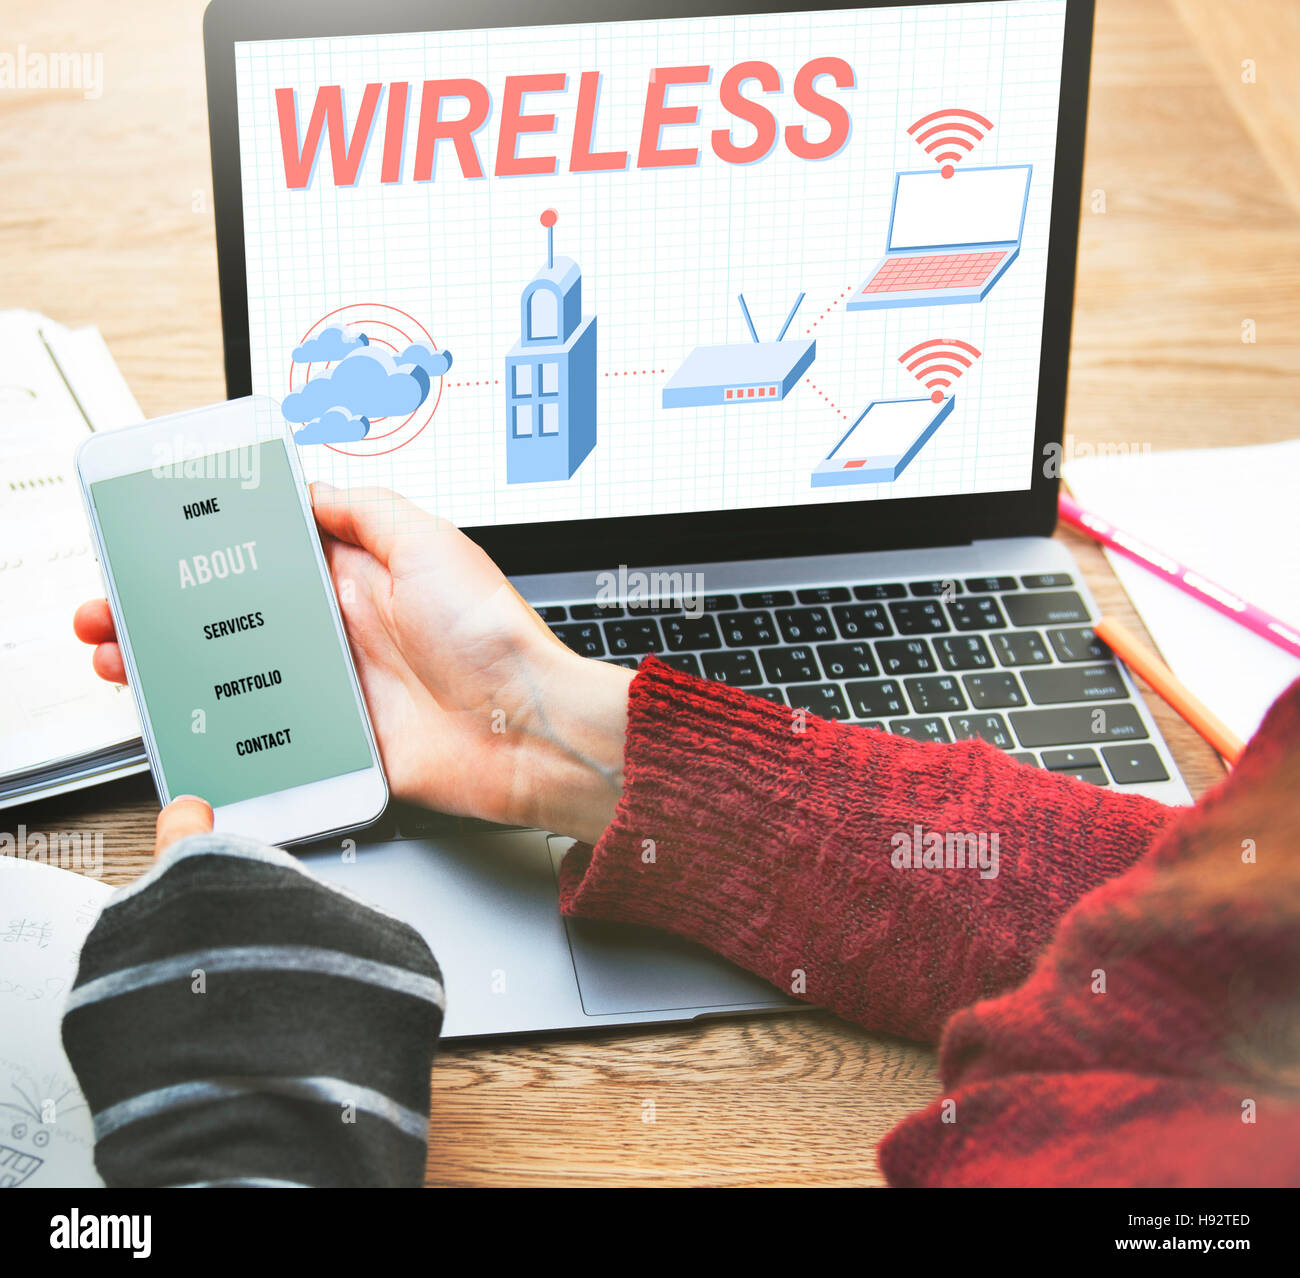 Wireless Connection Internet Modem Network Concept Stock Photo